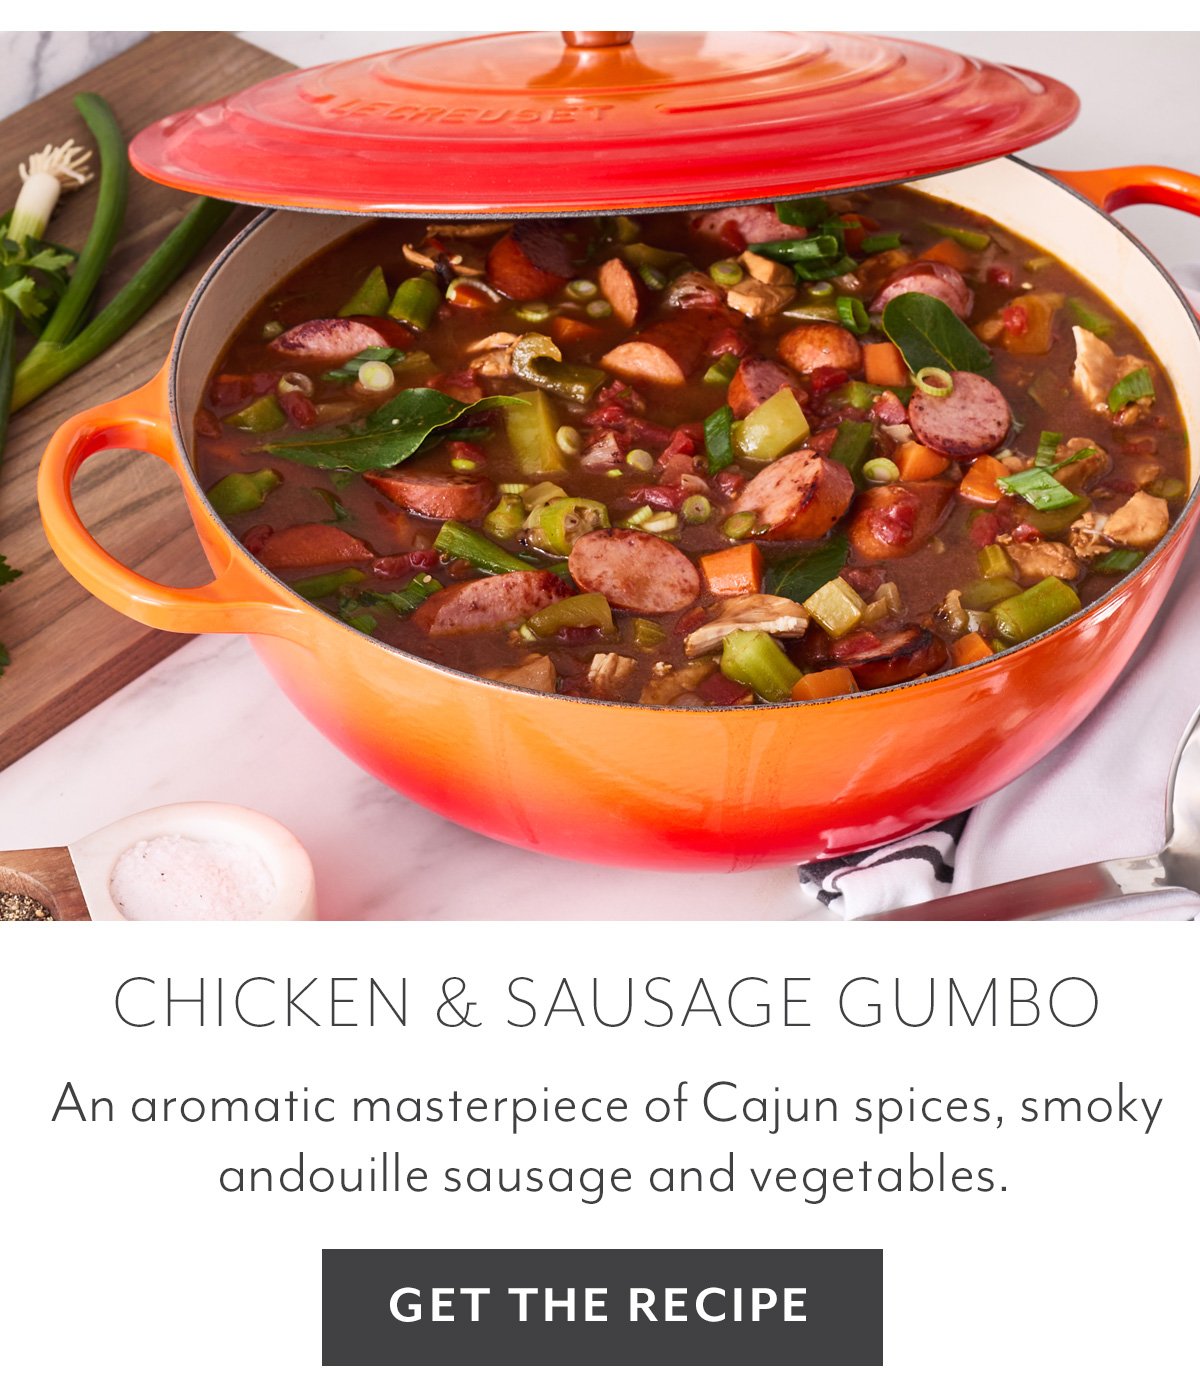 CHICKEN AND ANDOUILLE SAUSAGE GUMBO